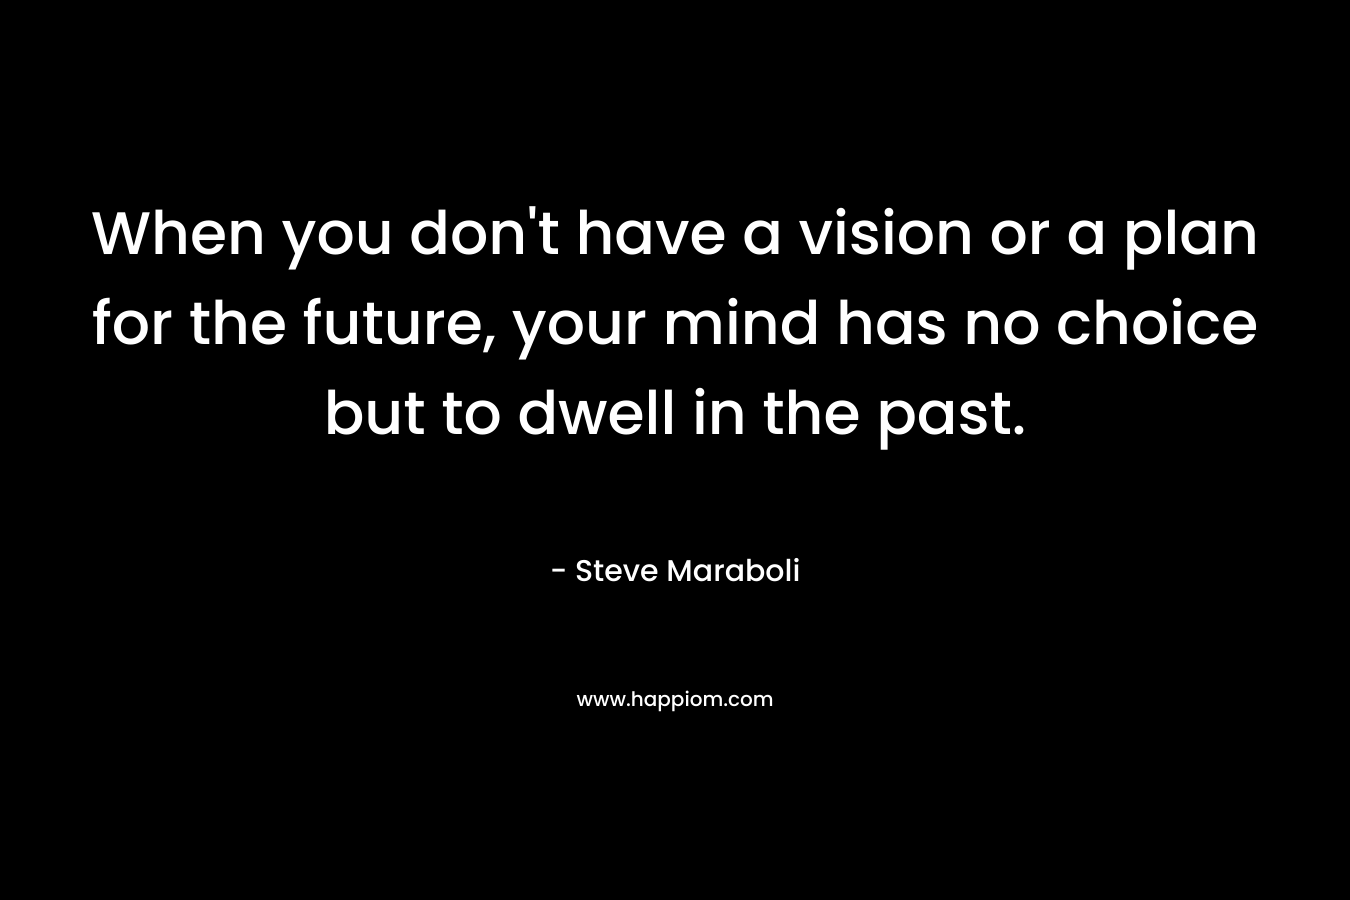 When you don't have a vision or a plan for the future, your mind has no choice but to dwell in the past.